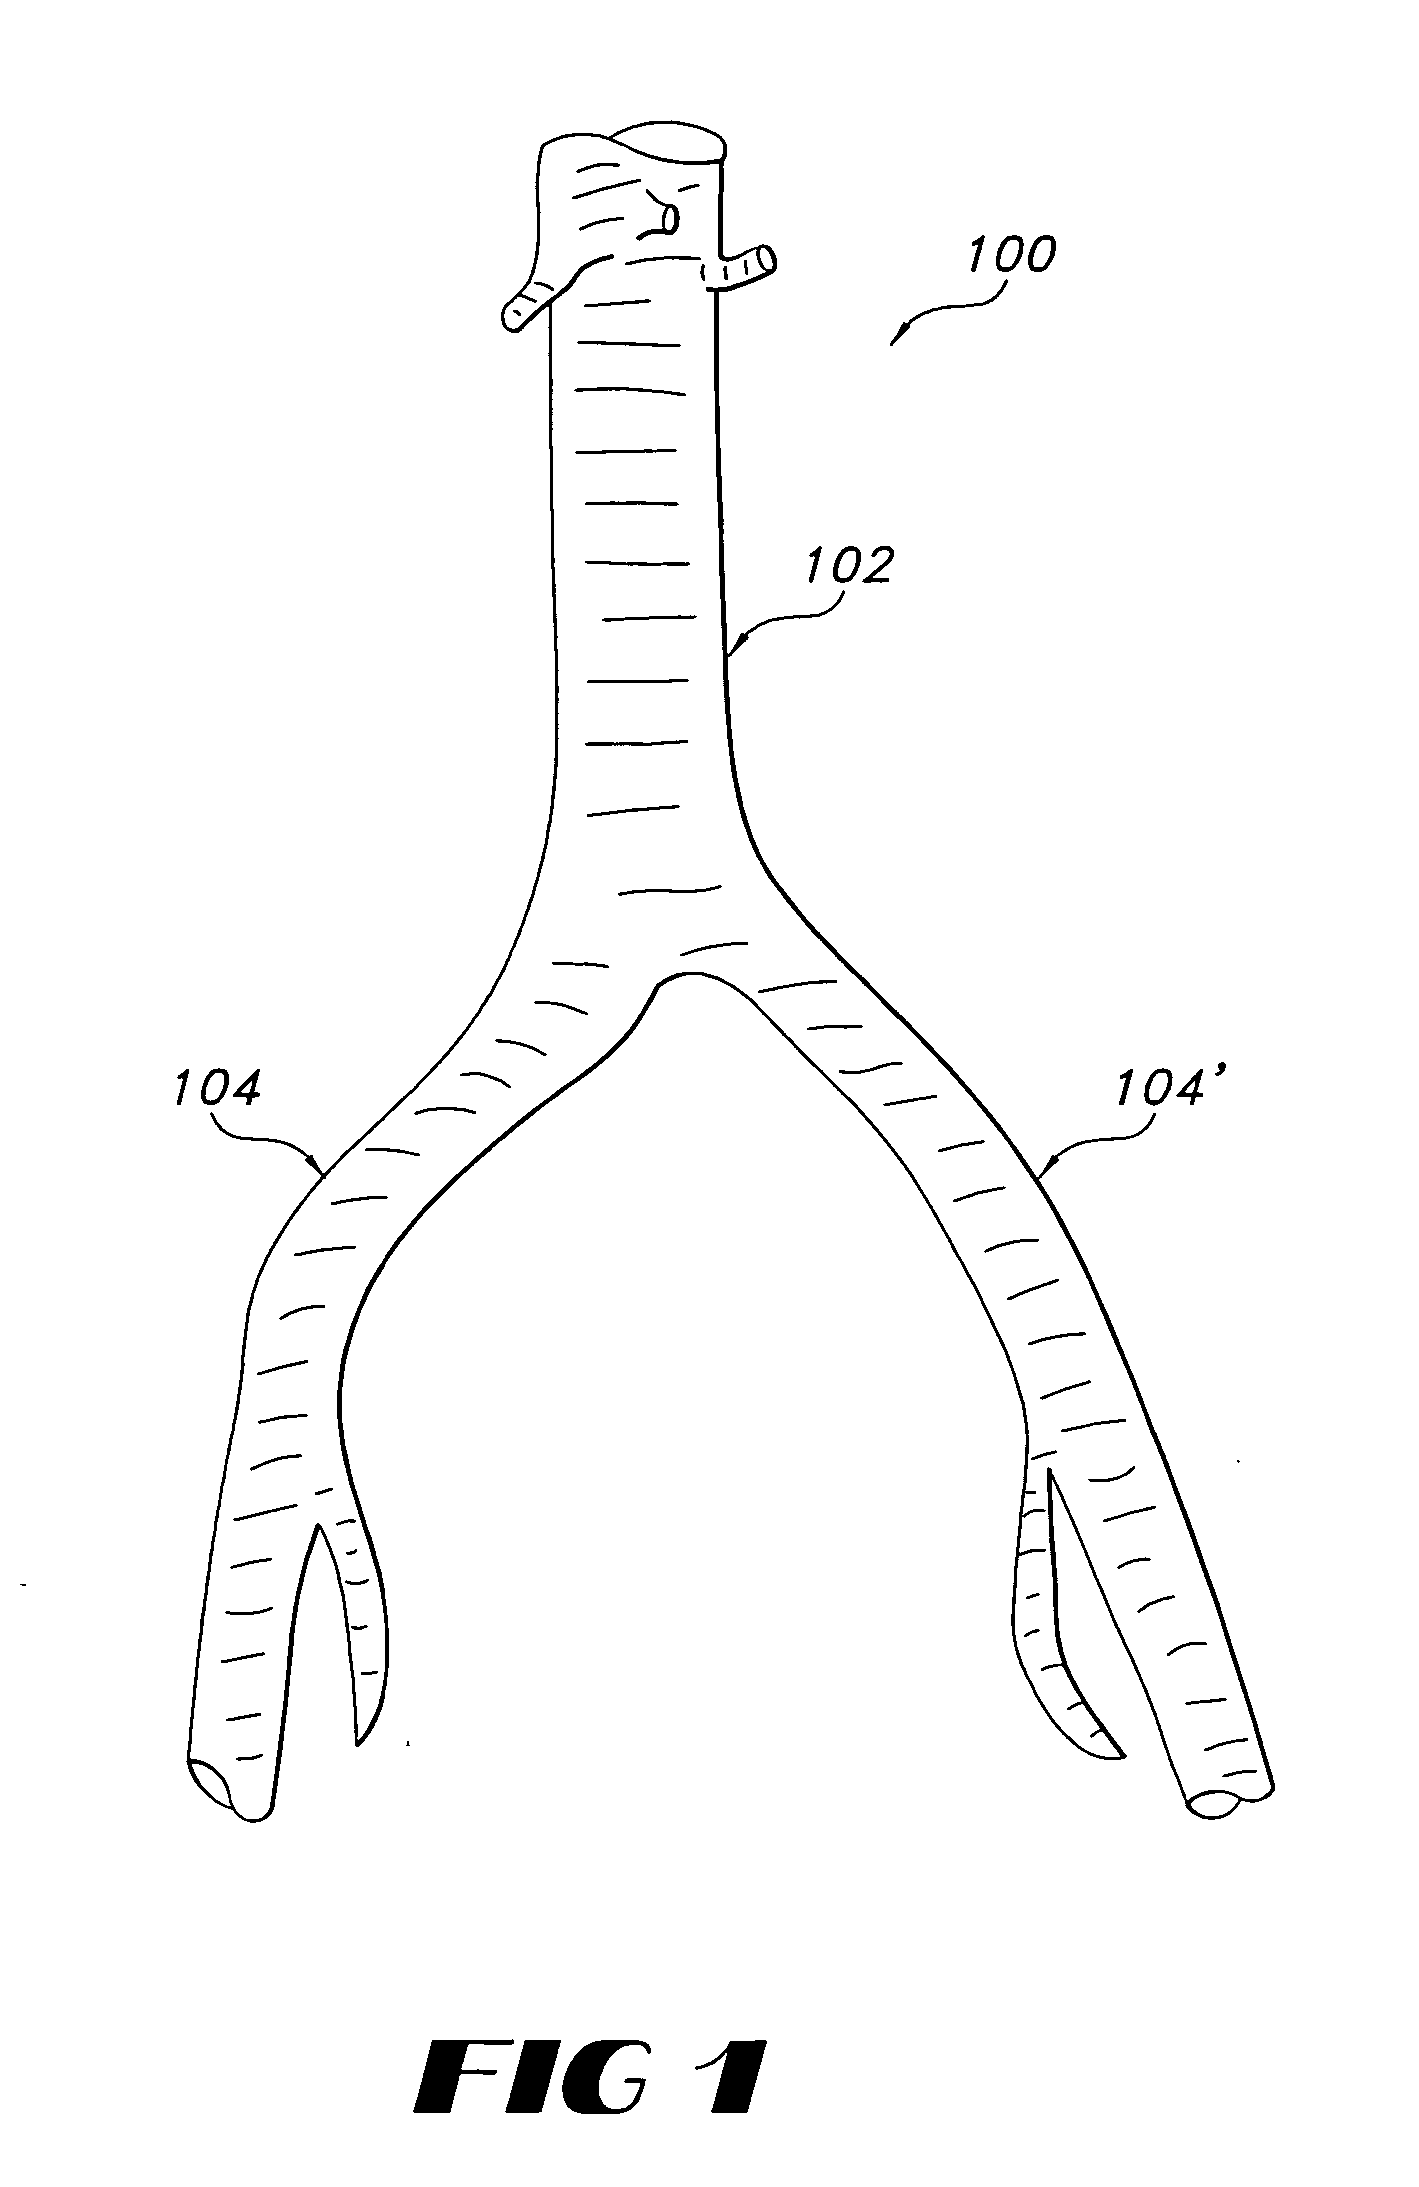 Endovascular prosthetic devices having hook and loop structures